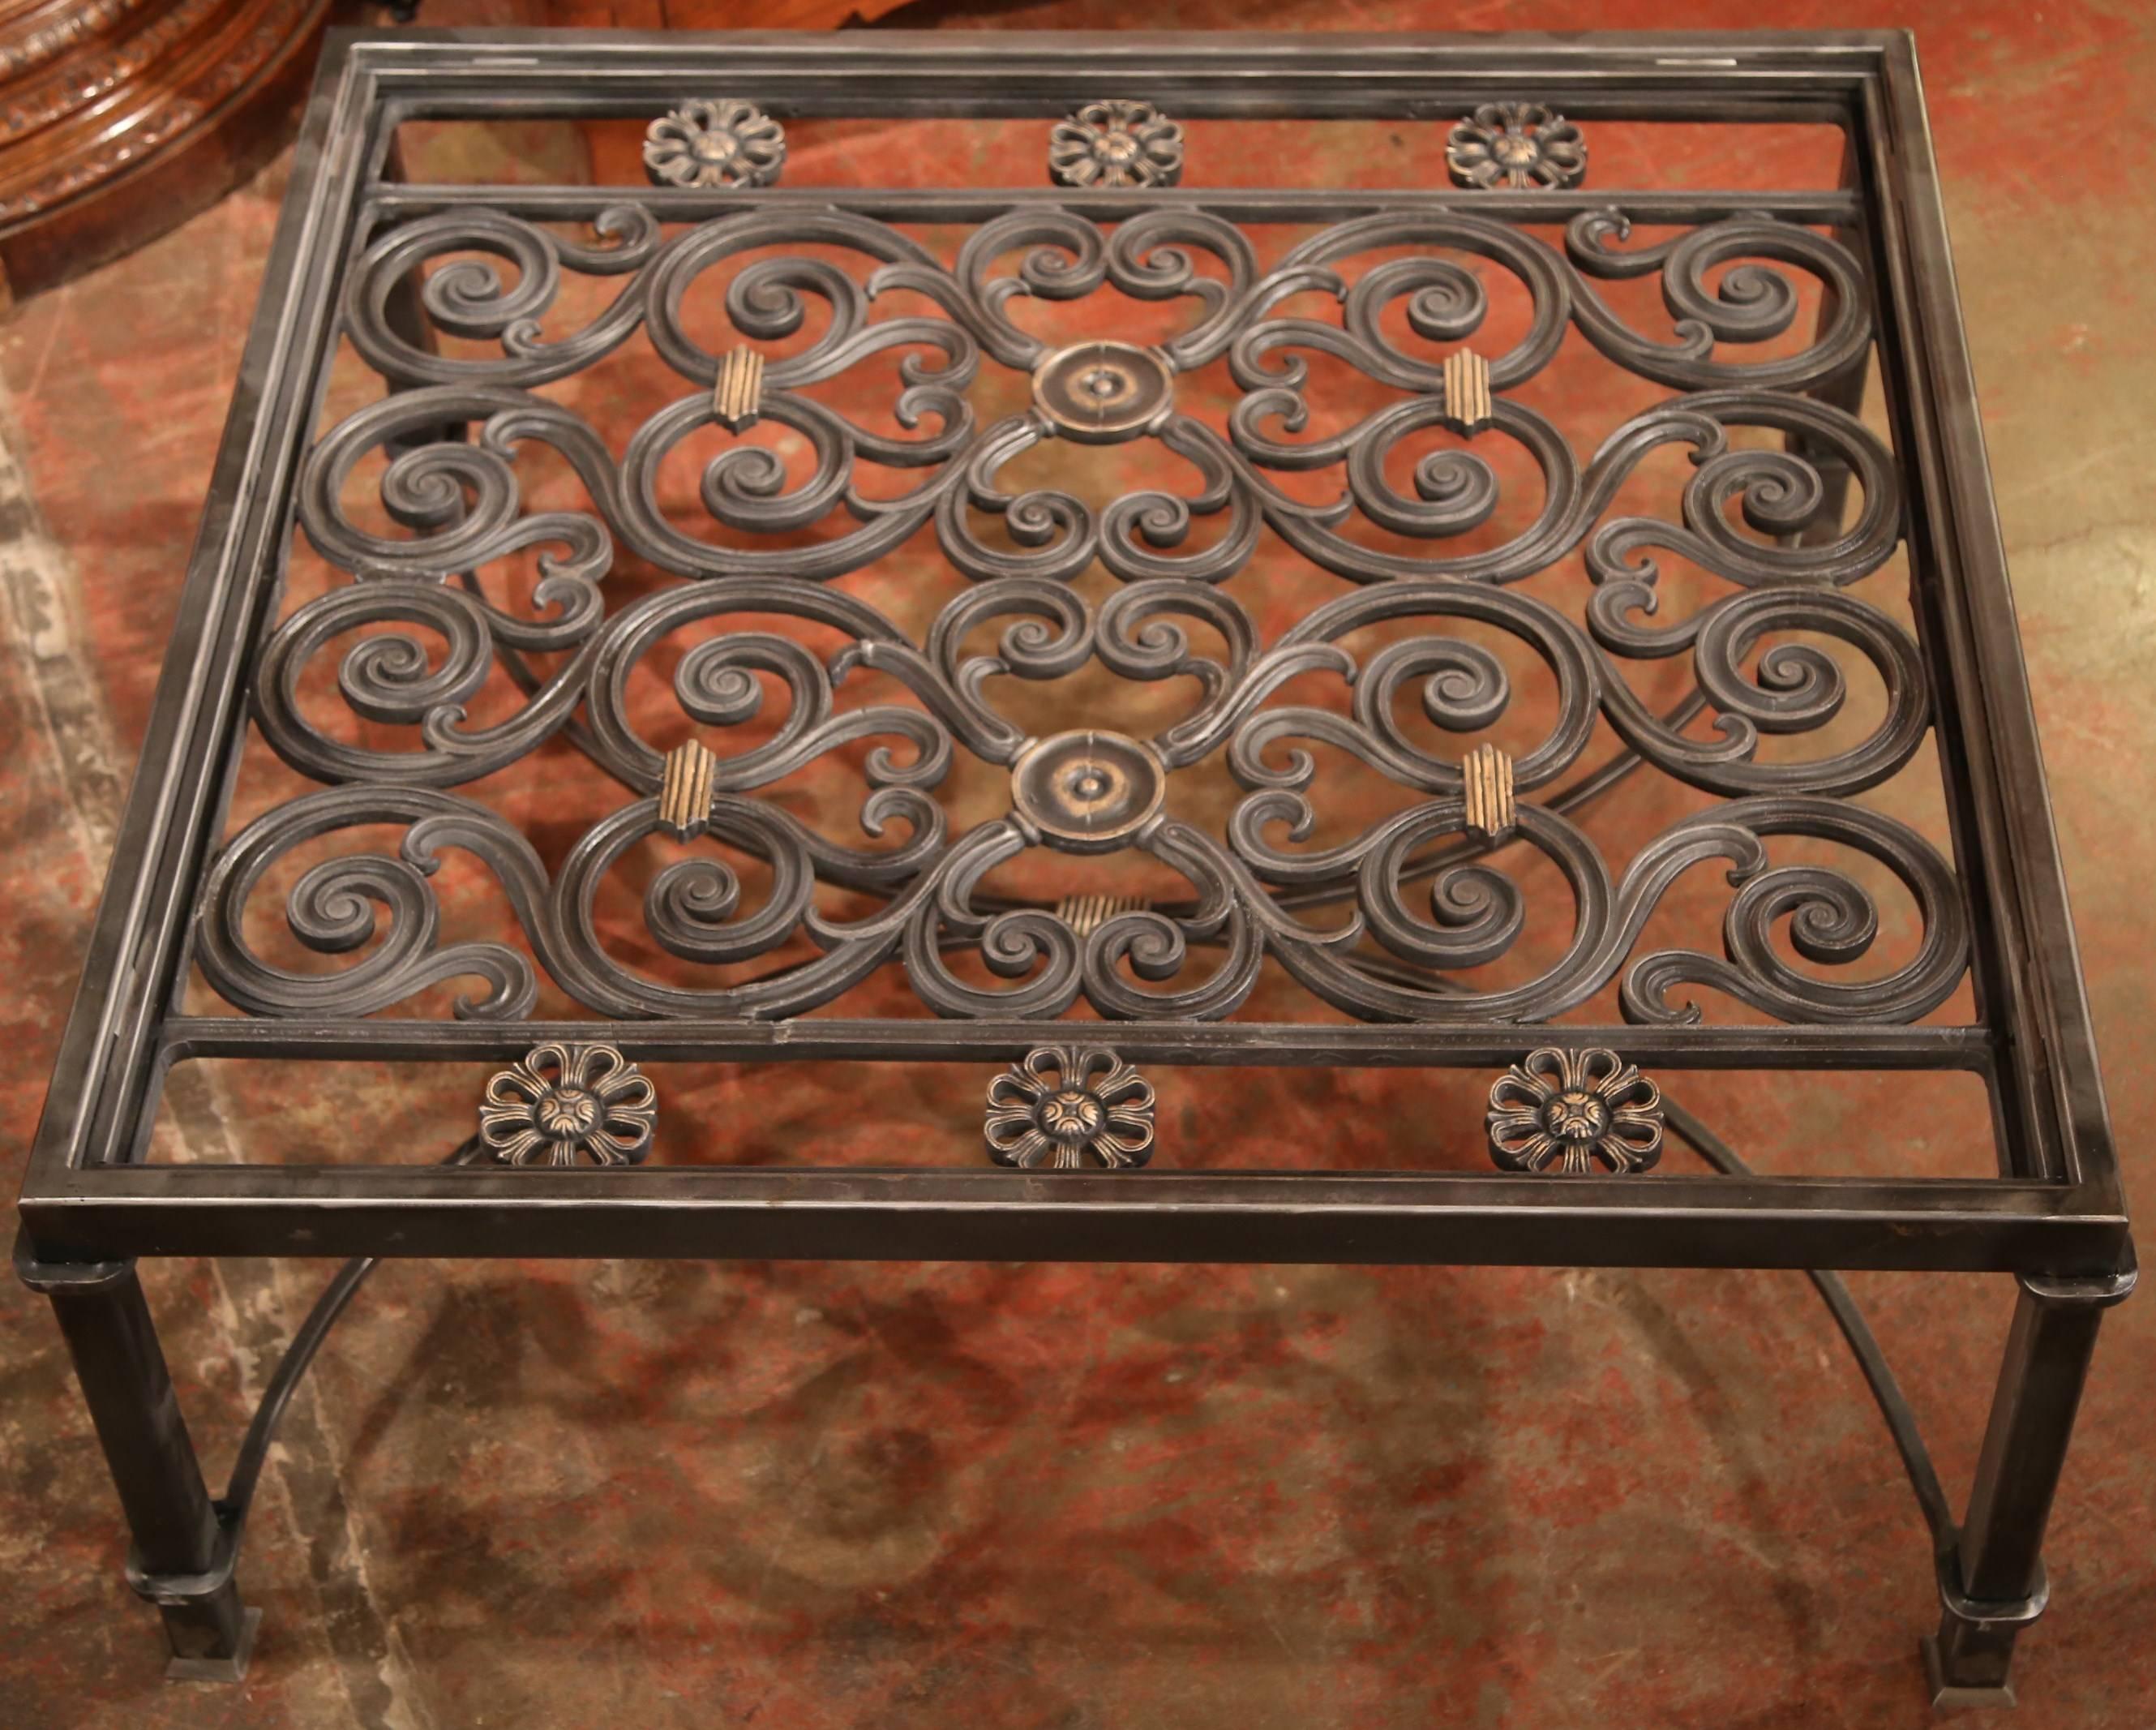 This iron base would make an elegant coffee table in your den or formal living room. Almost square in shape, the low table was created from a pair of ornate, antique gates which have been welded together. (In France, most of these balconies were